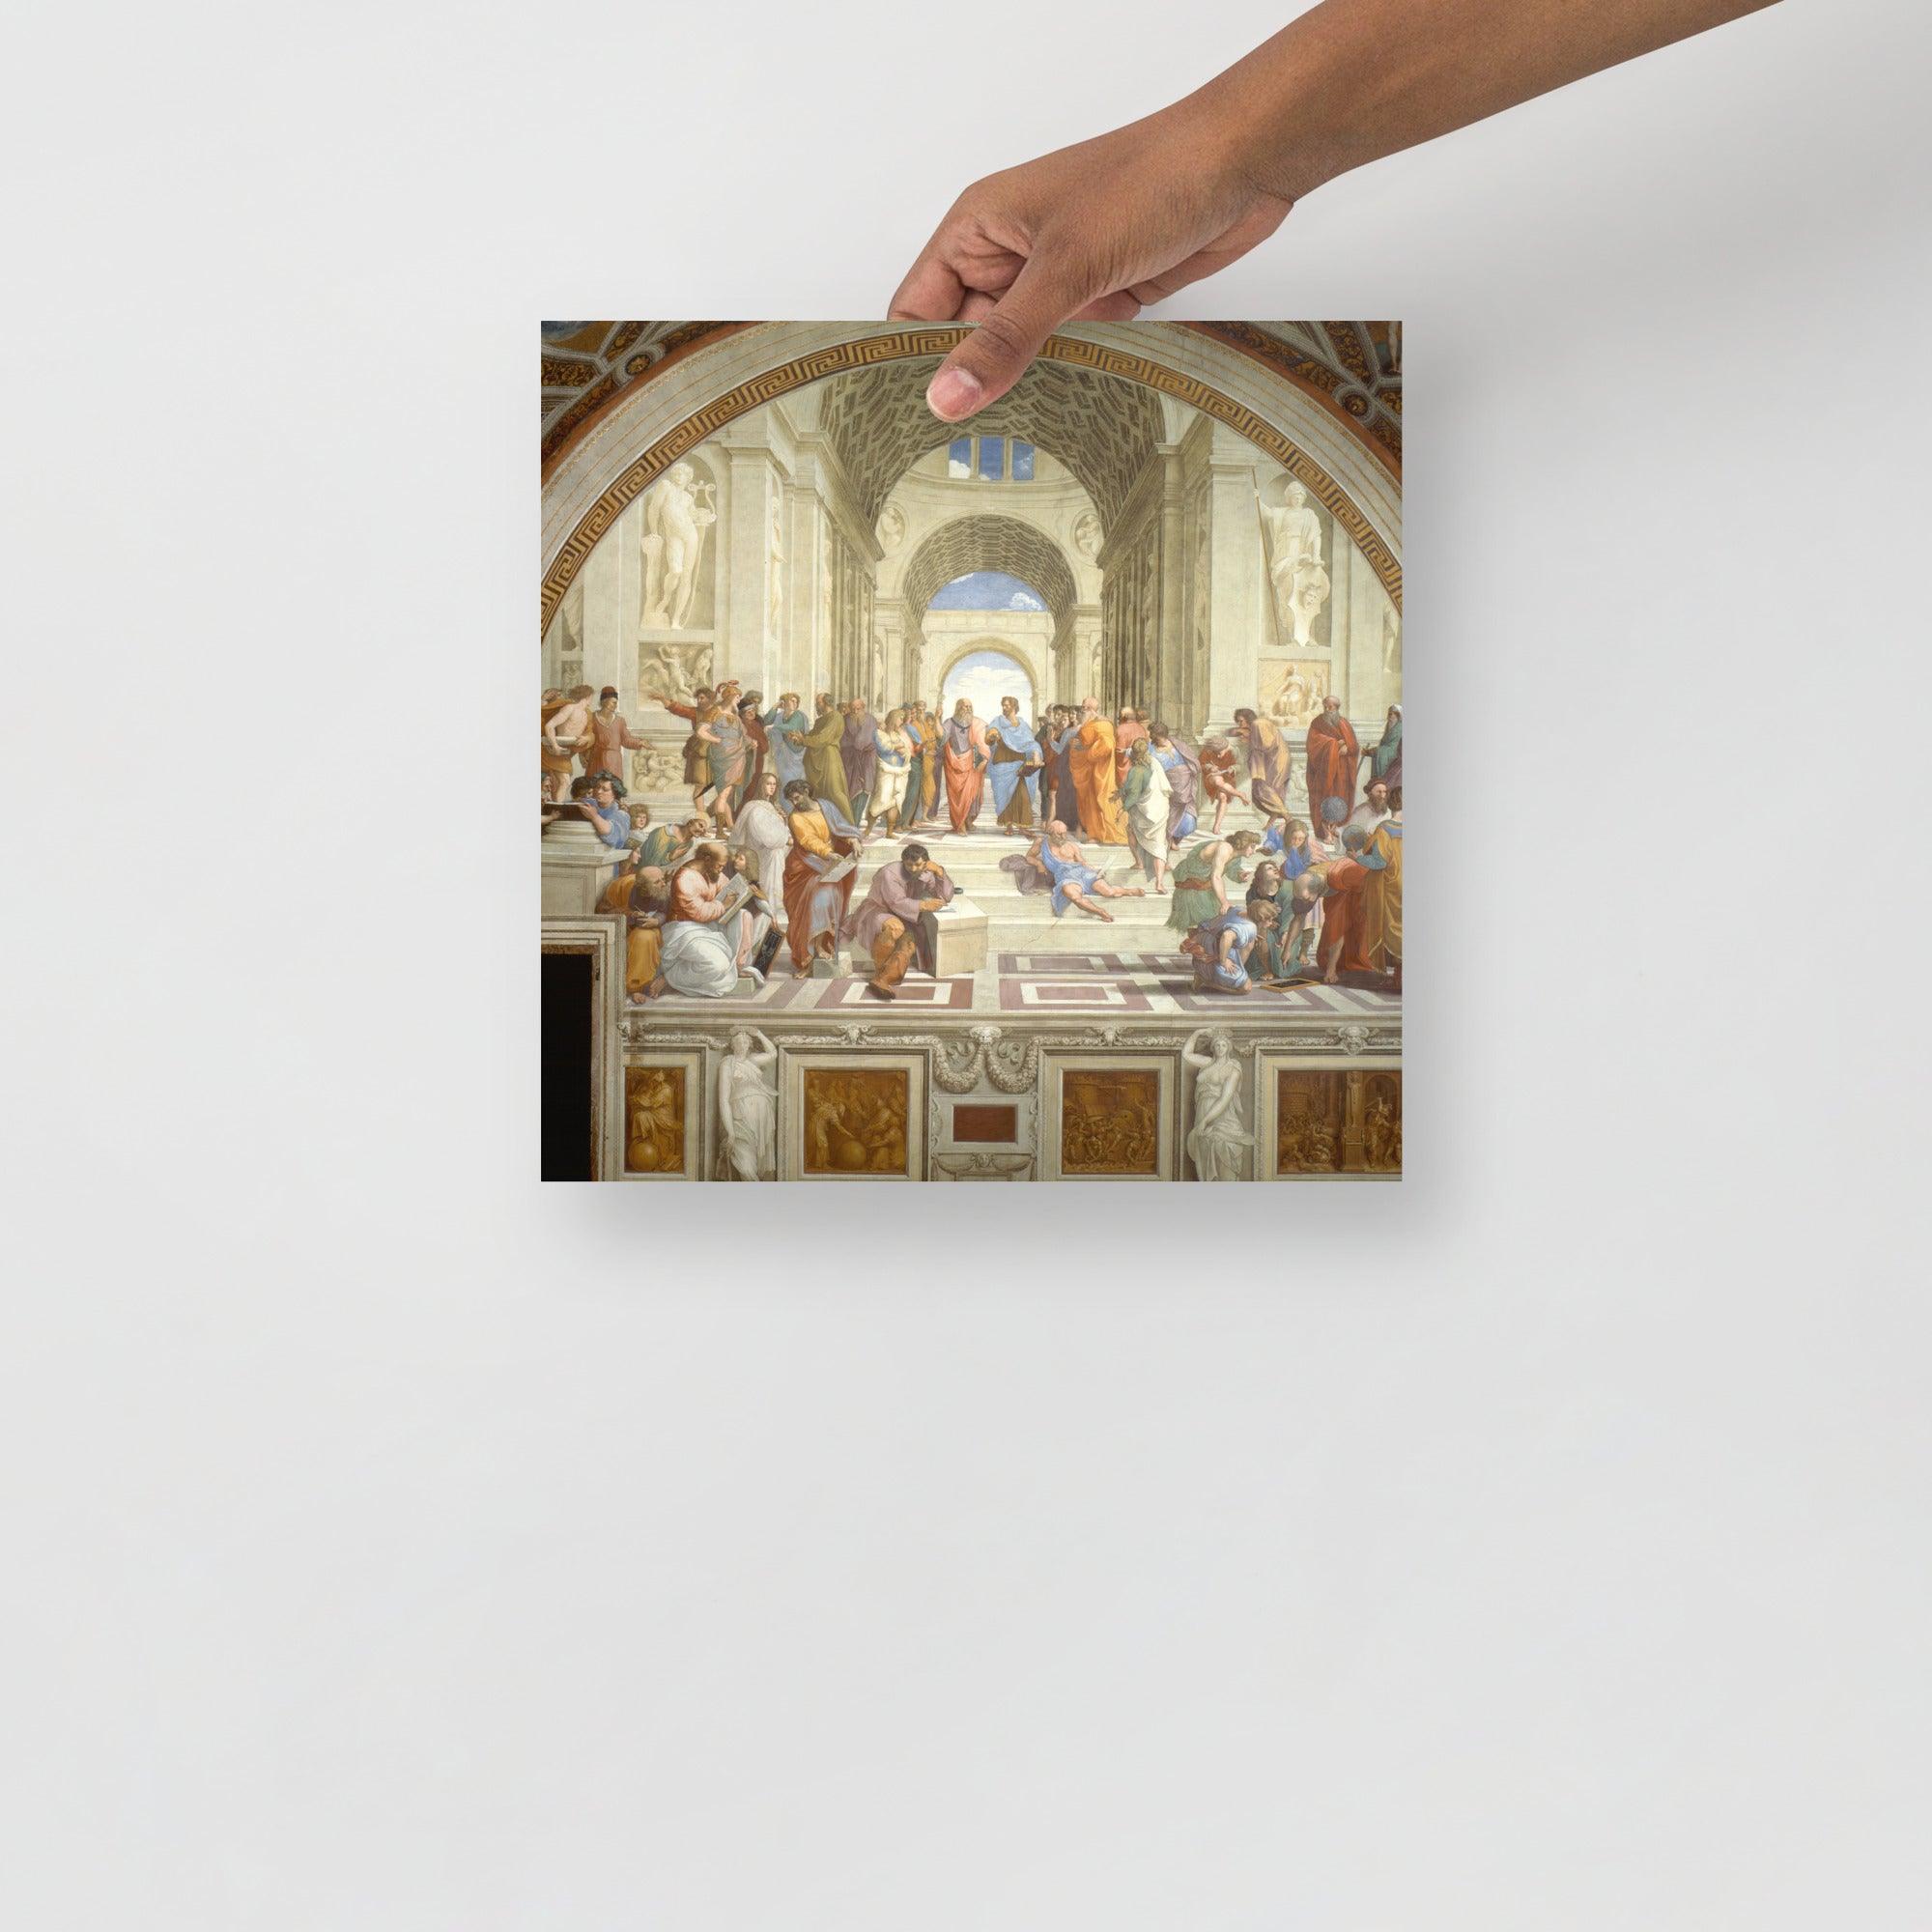 The School of Athens by Raphael poster on a plain backdrop in size 12x12”.